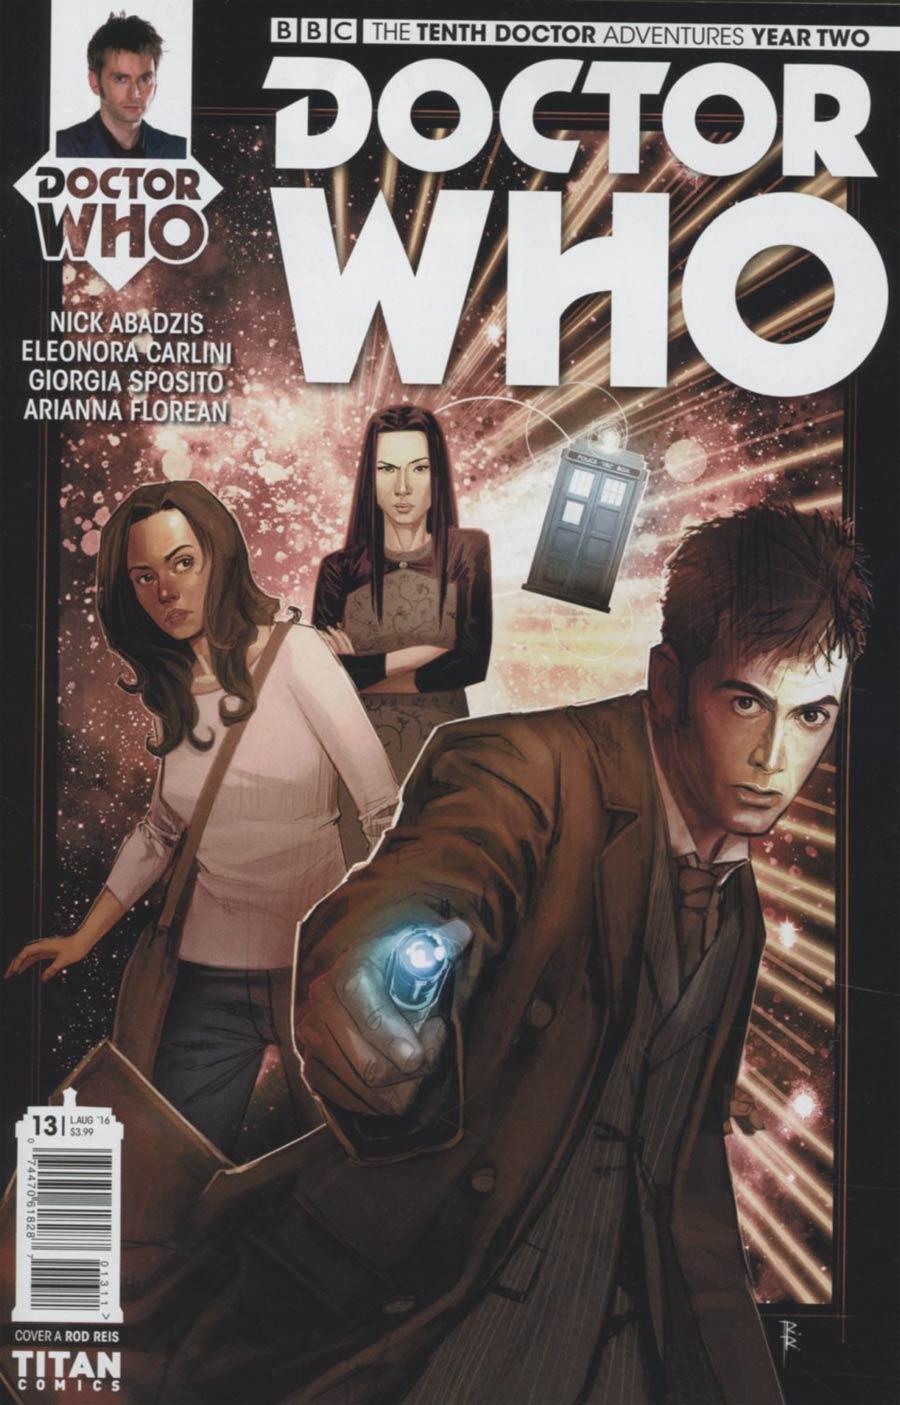 Doctor Who 10th Doctor Year Two Vol. 1 #13